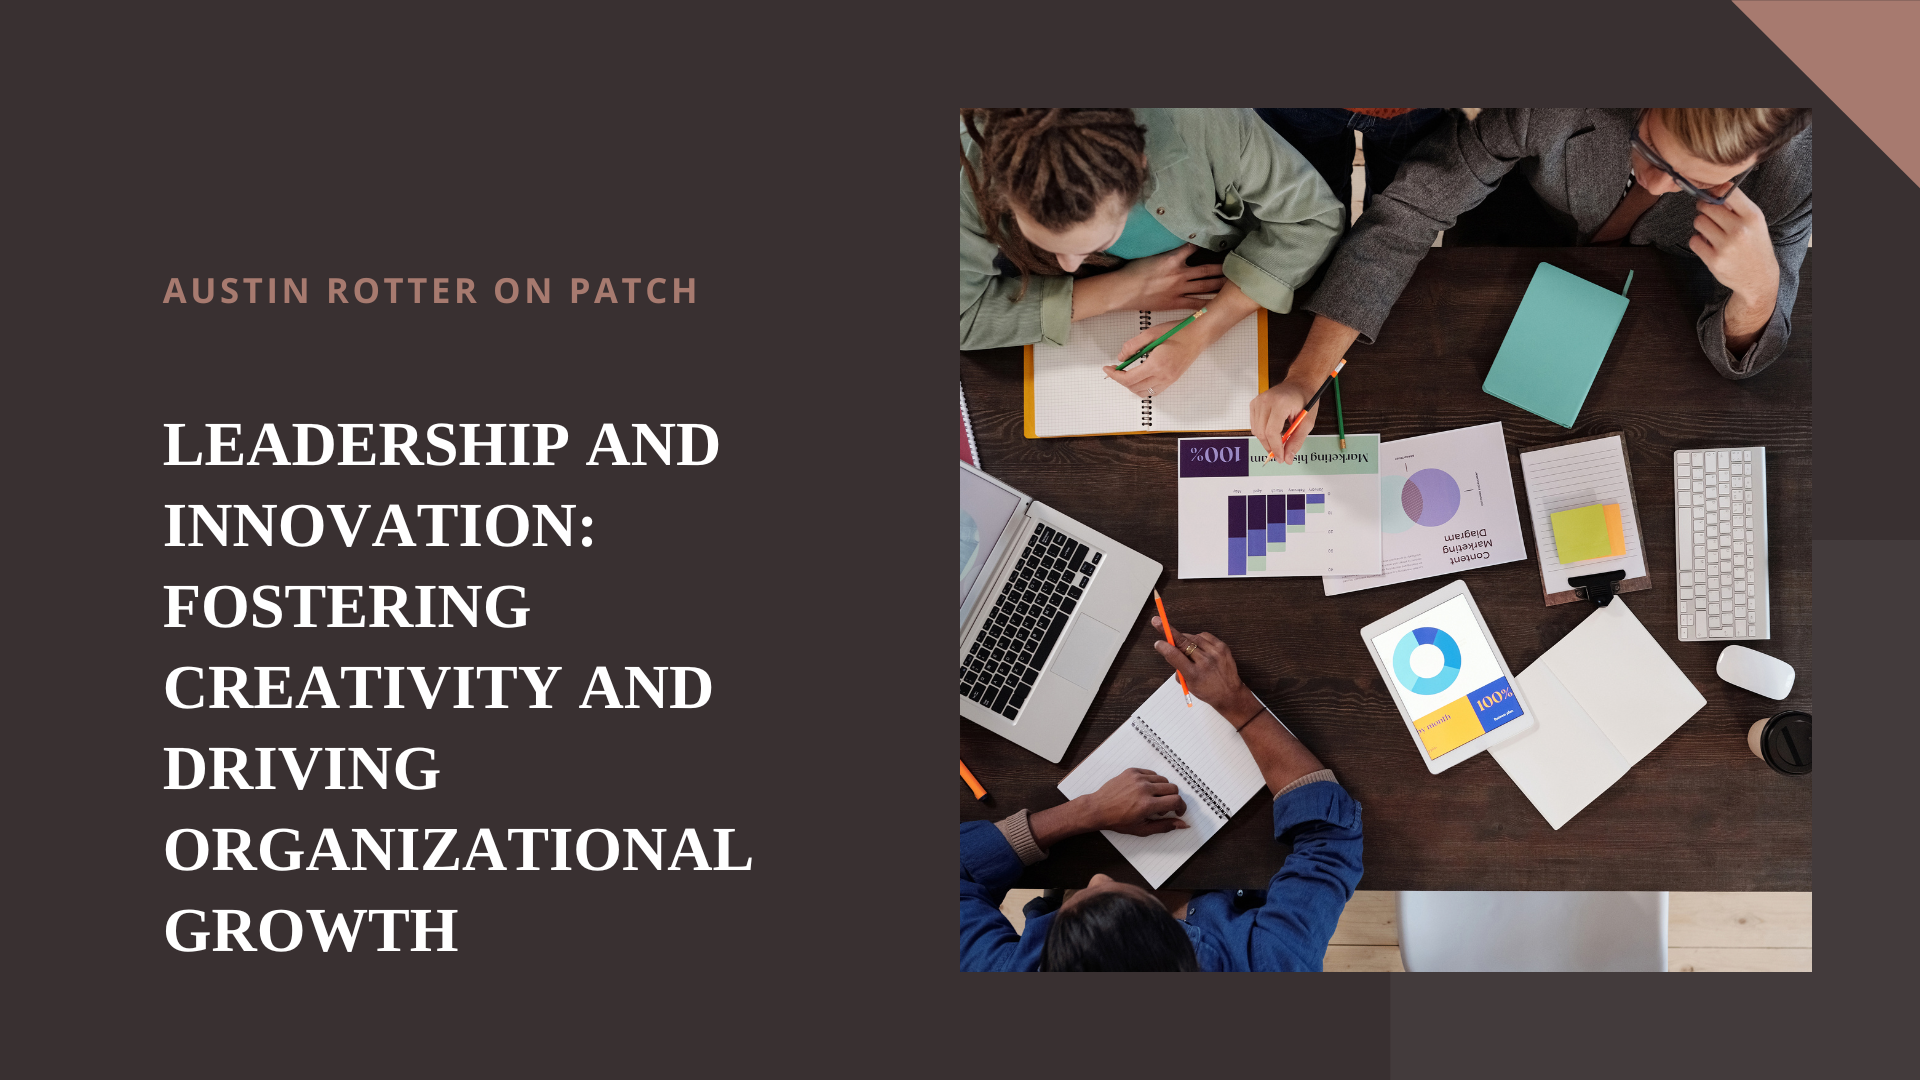 AUSTIN ROTTER ON PATCH

LEADERSHIP AND
INNOVATION:
FOSTERING
CREATIVITY AND
DRIVING
ORGANIZATIONAL
GROWTH